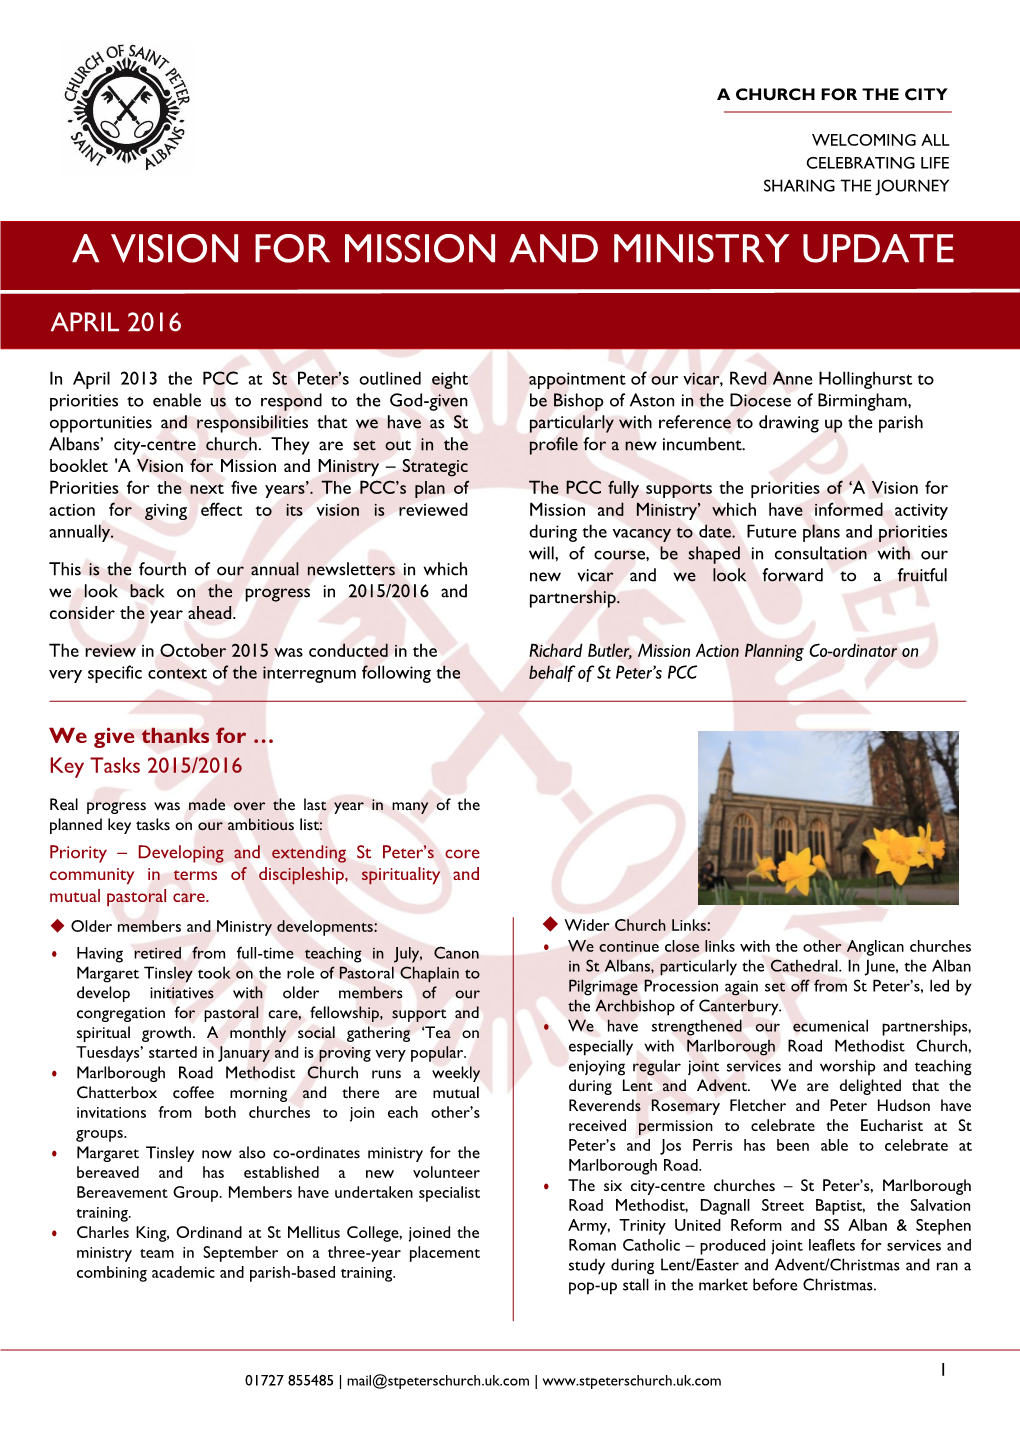 A Vision for Mission and Ministry Update